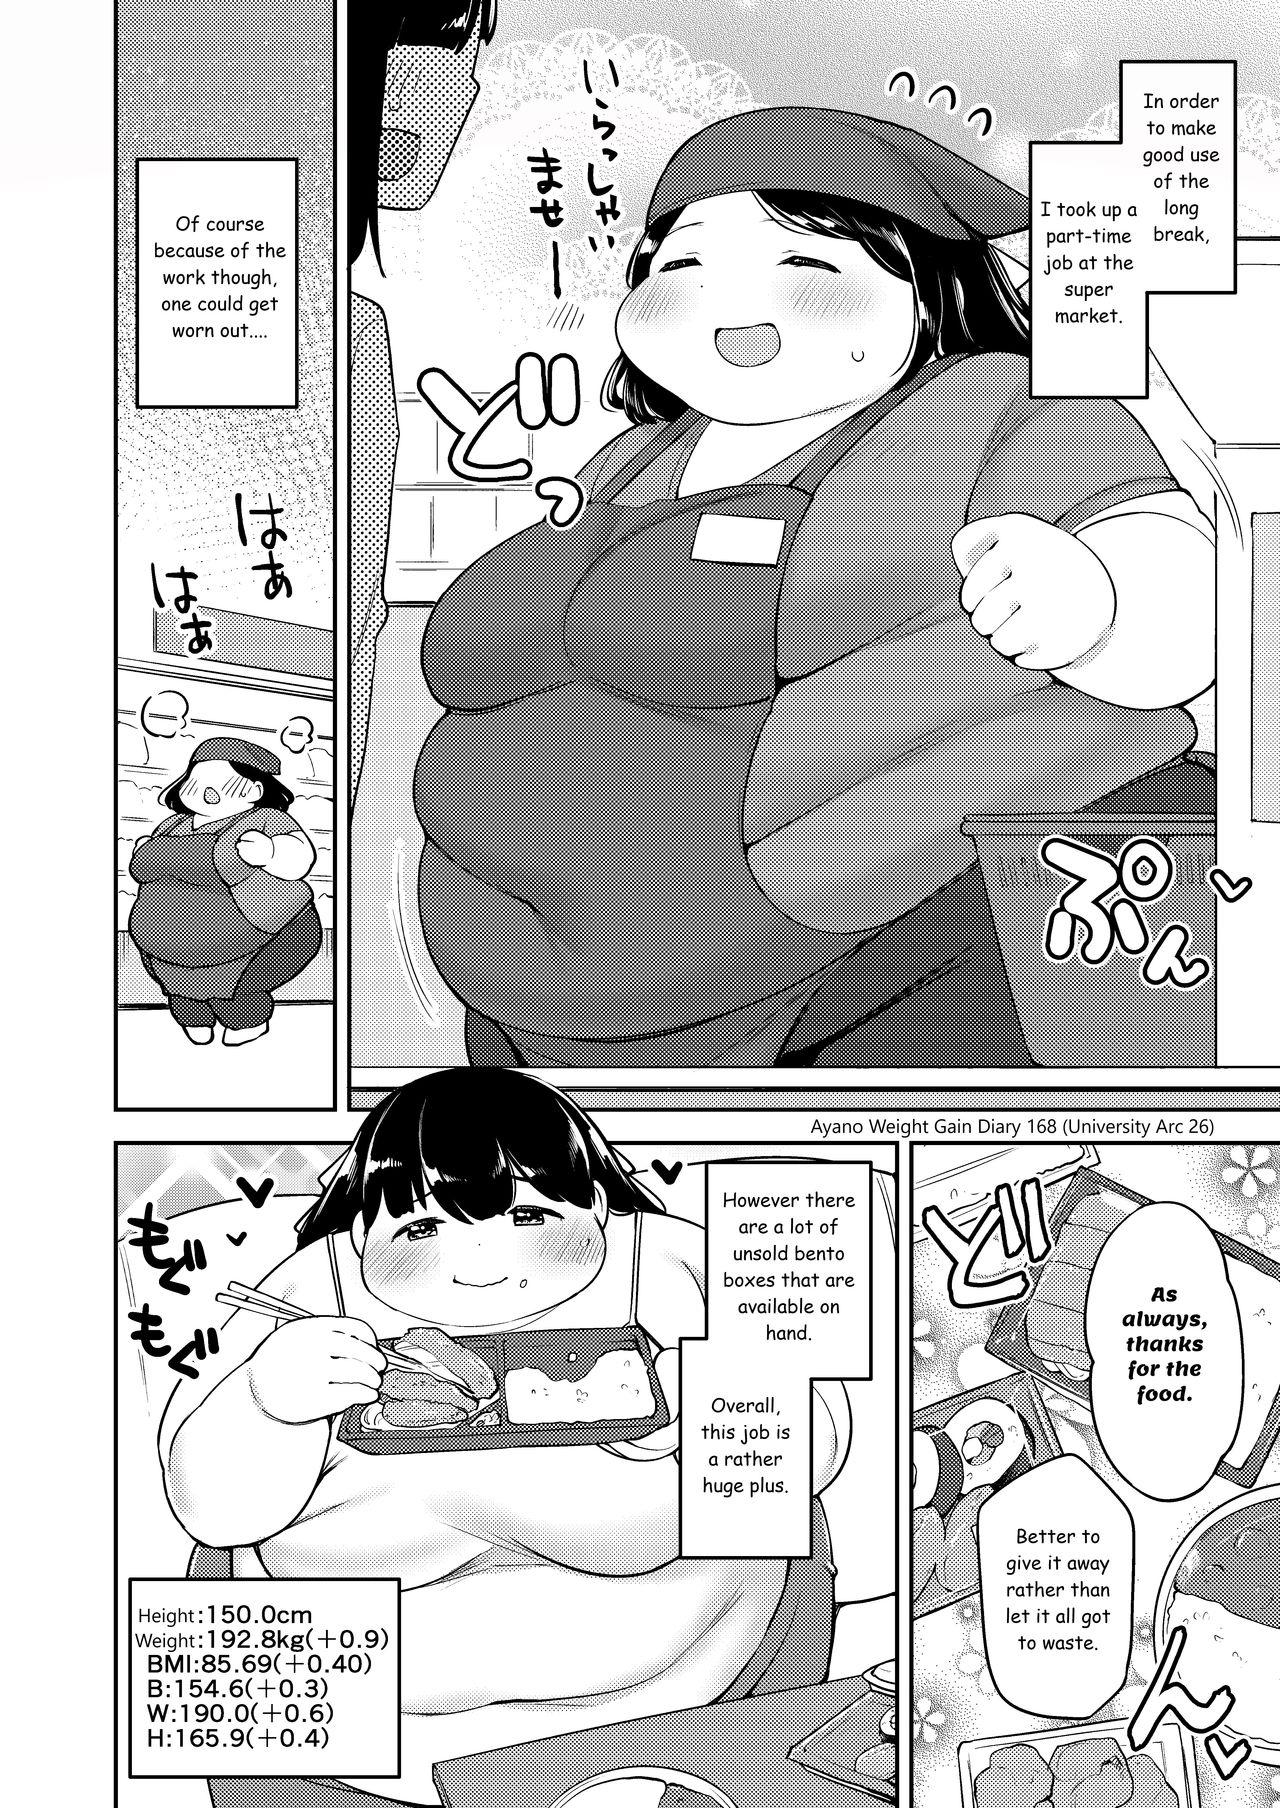 Ayano's Weight Gain Diary [English] Torrent(181 pages) 167